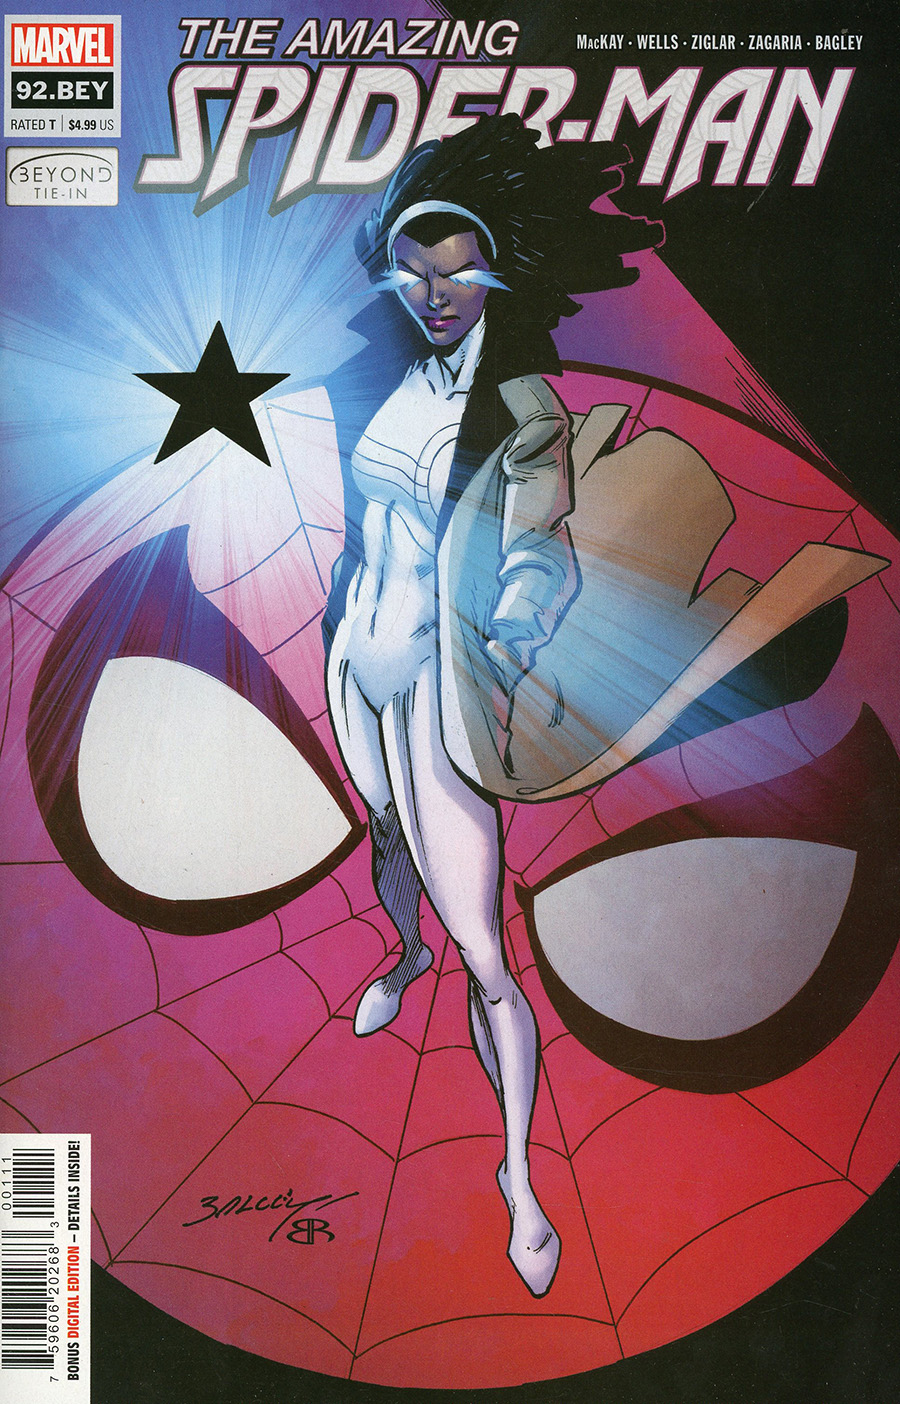 Amazing Spider-Man Vol 5 #92BEY Cover A Regular Mark Bagley Cover